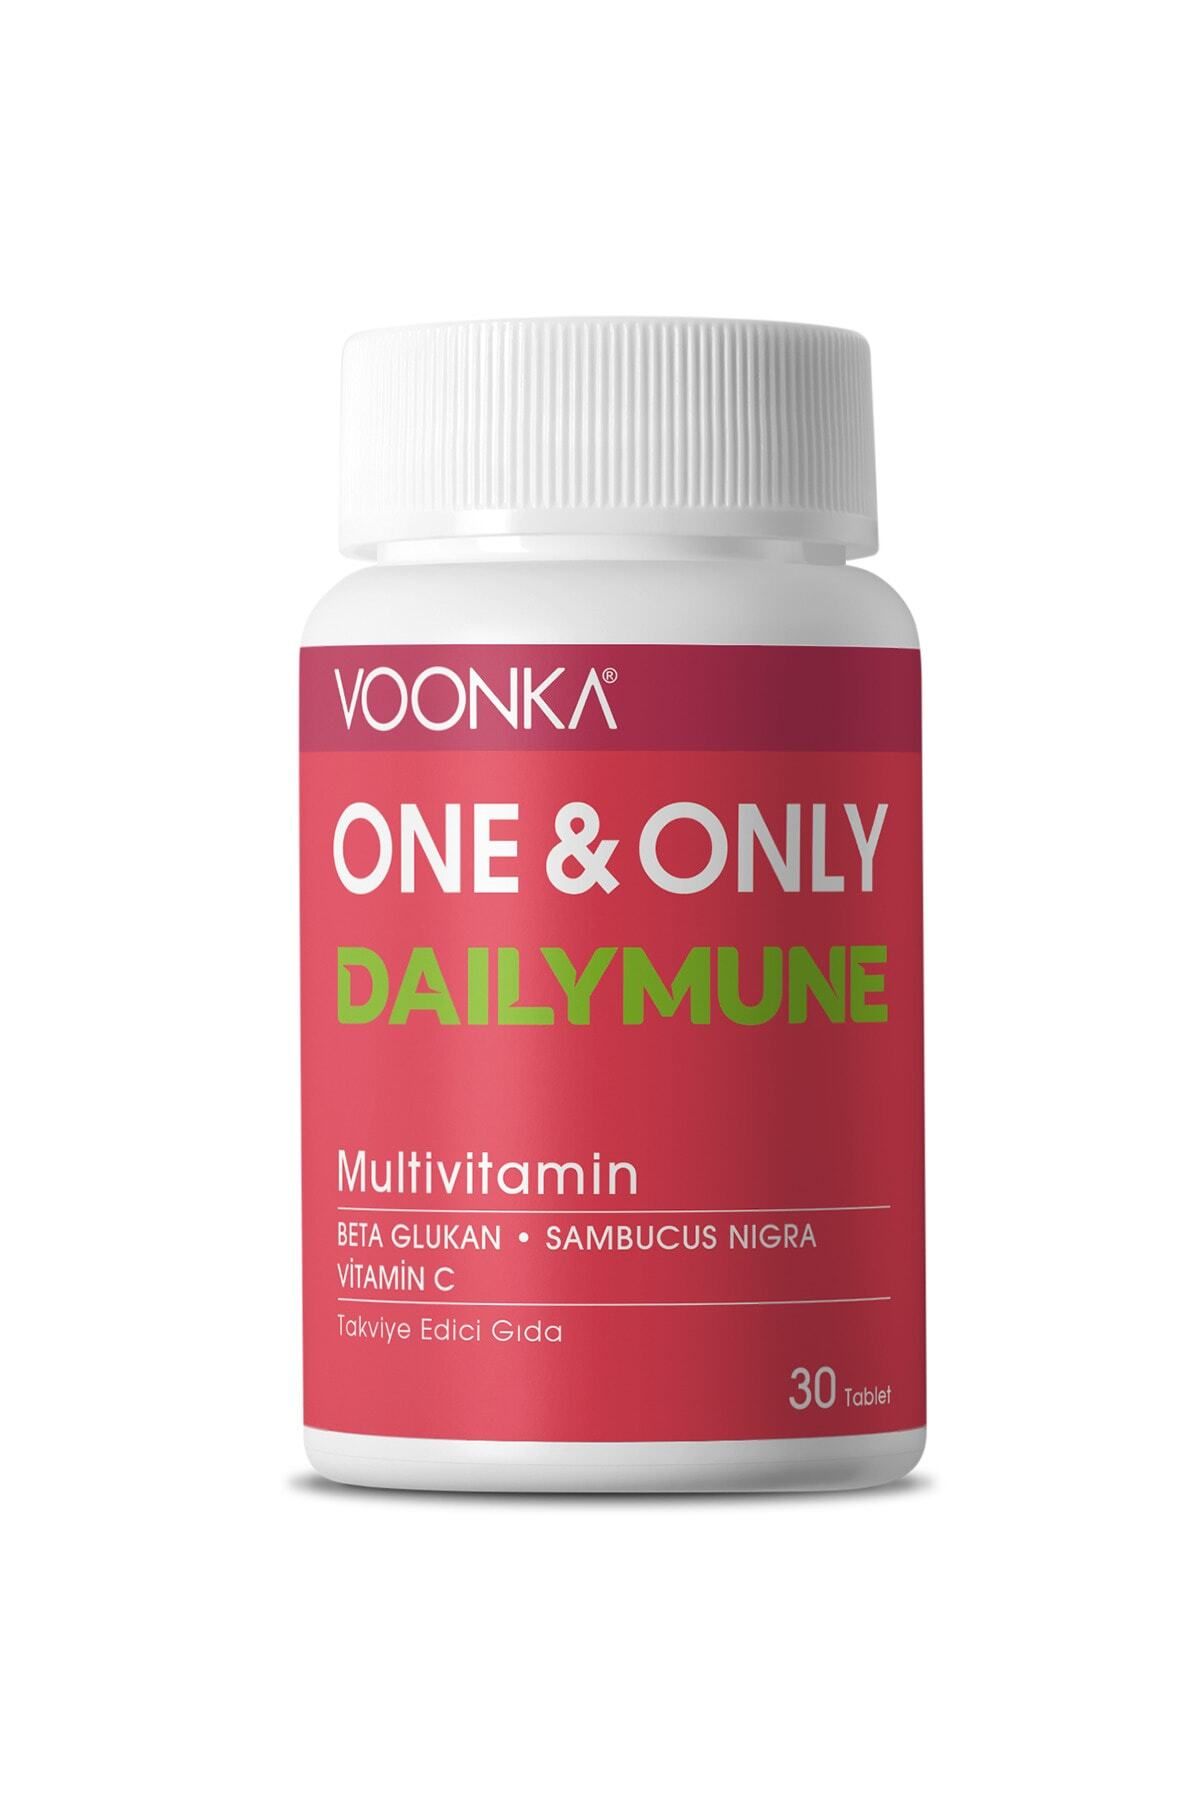 Voonka One And Only Dailymune 30 Tablet